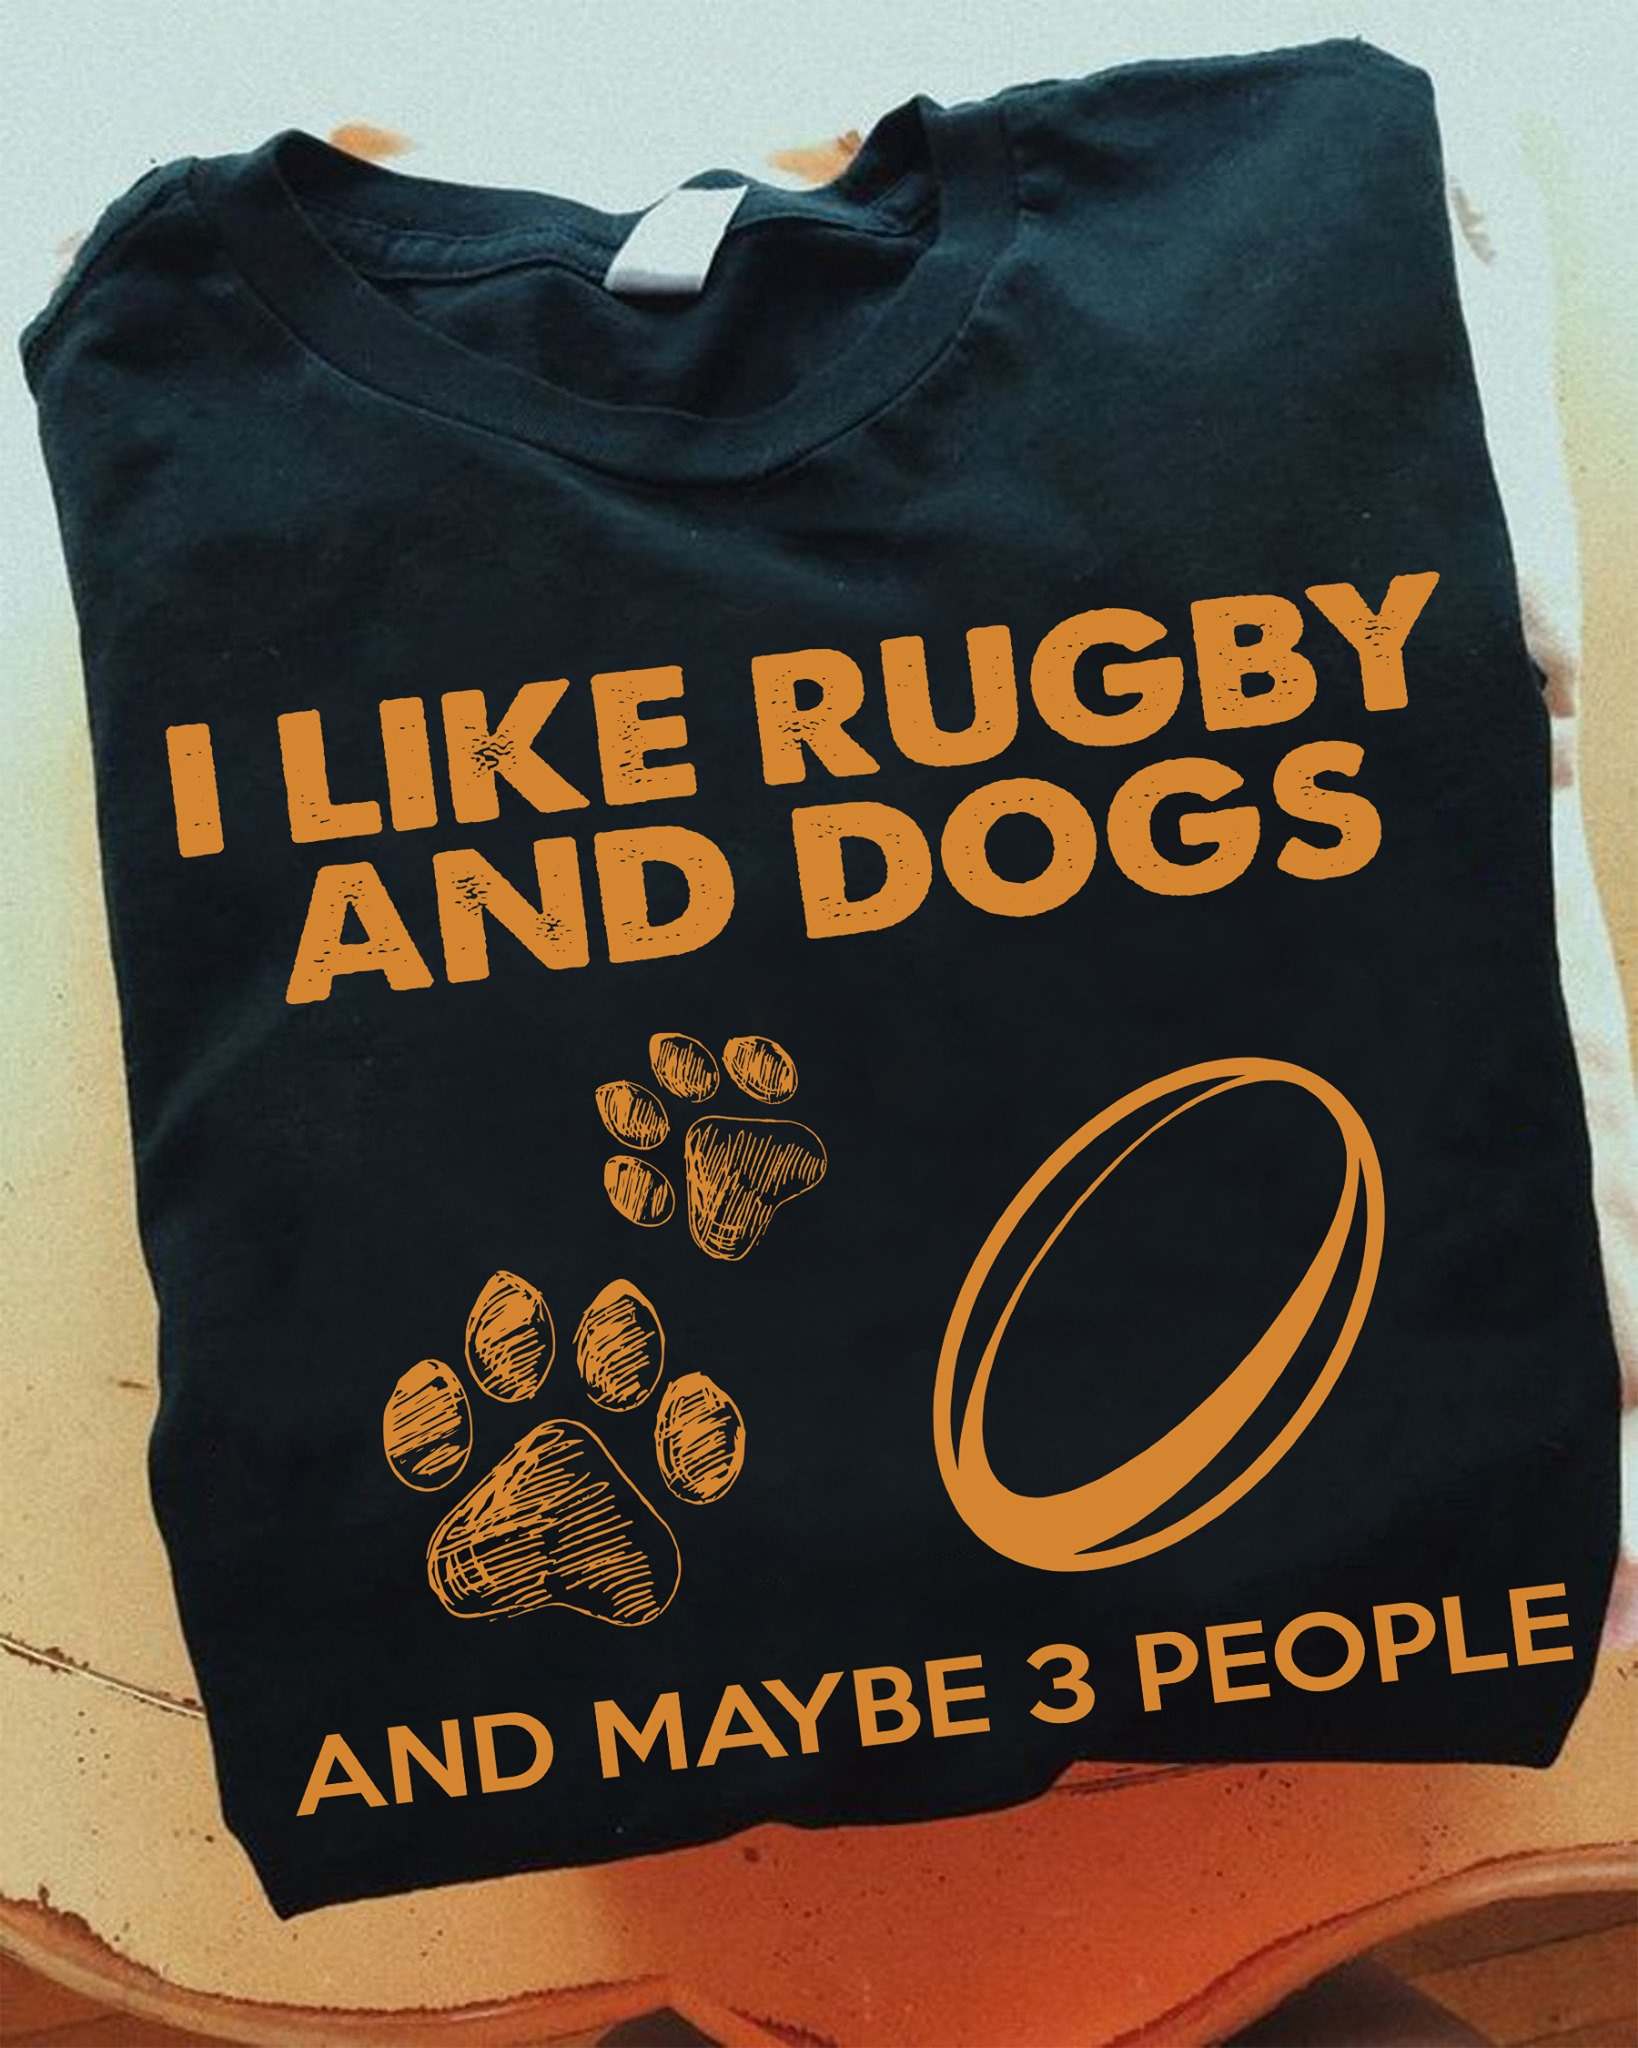 I like rugby and dogs and maybe 3 people